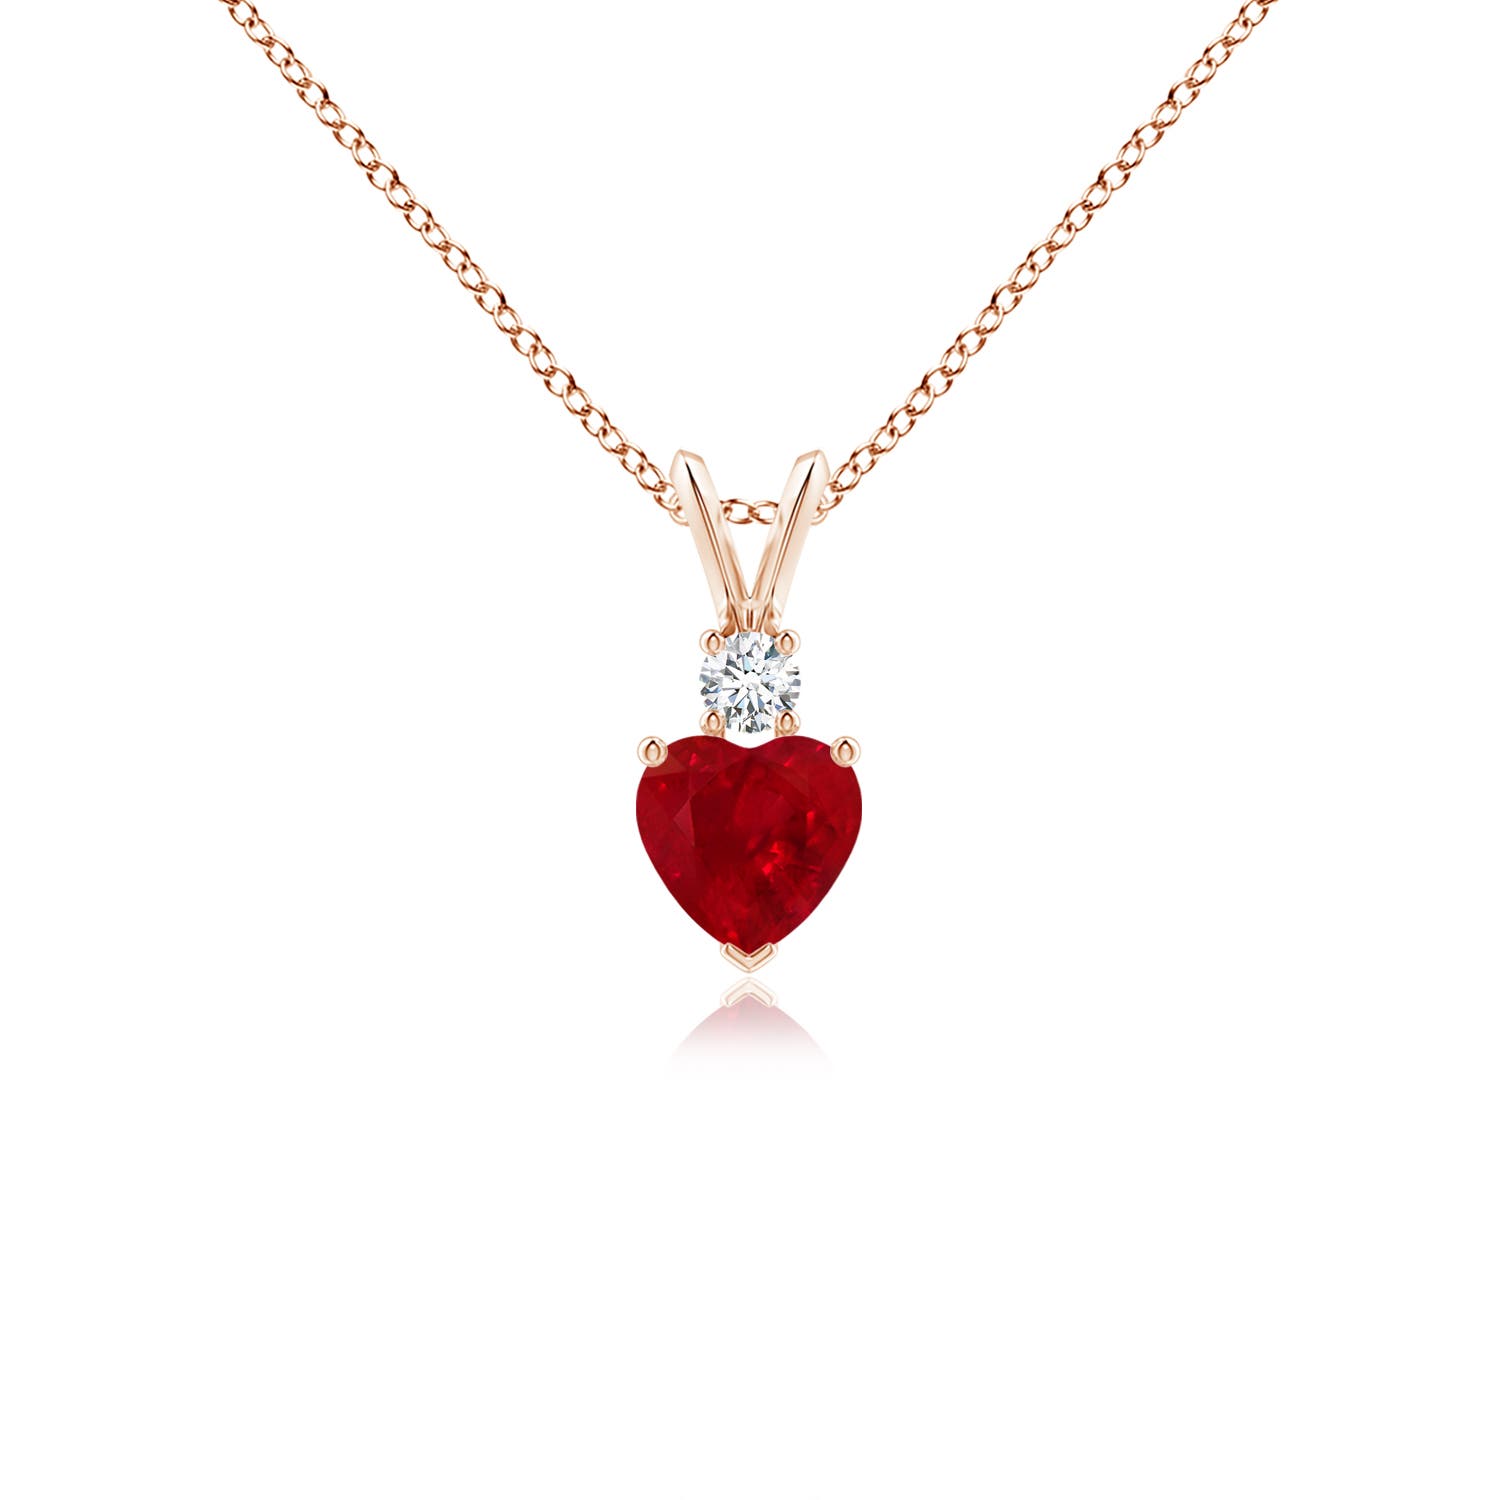 AAA - Ruby / 0.59 CT / 14 KT Rose Gold